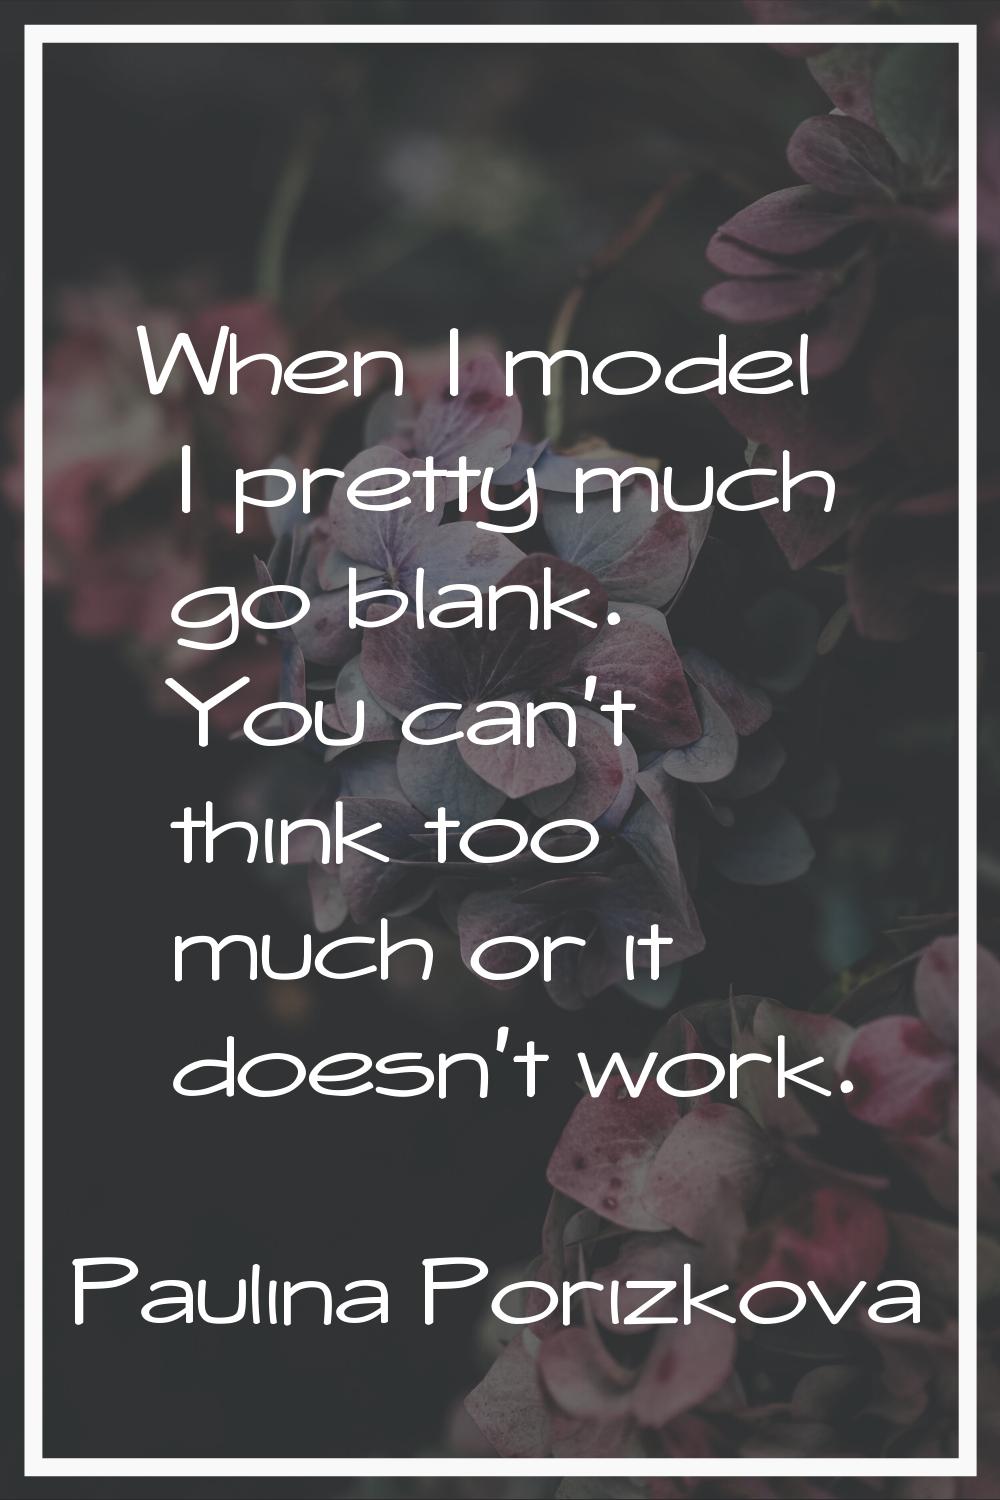 When I model I pretty much go blank. You can't think too much or it doesn't work.